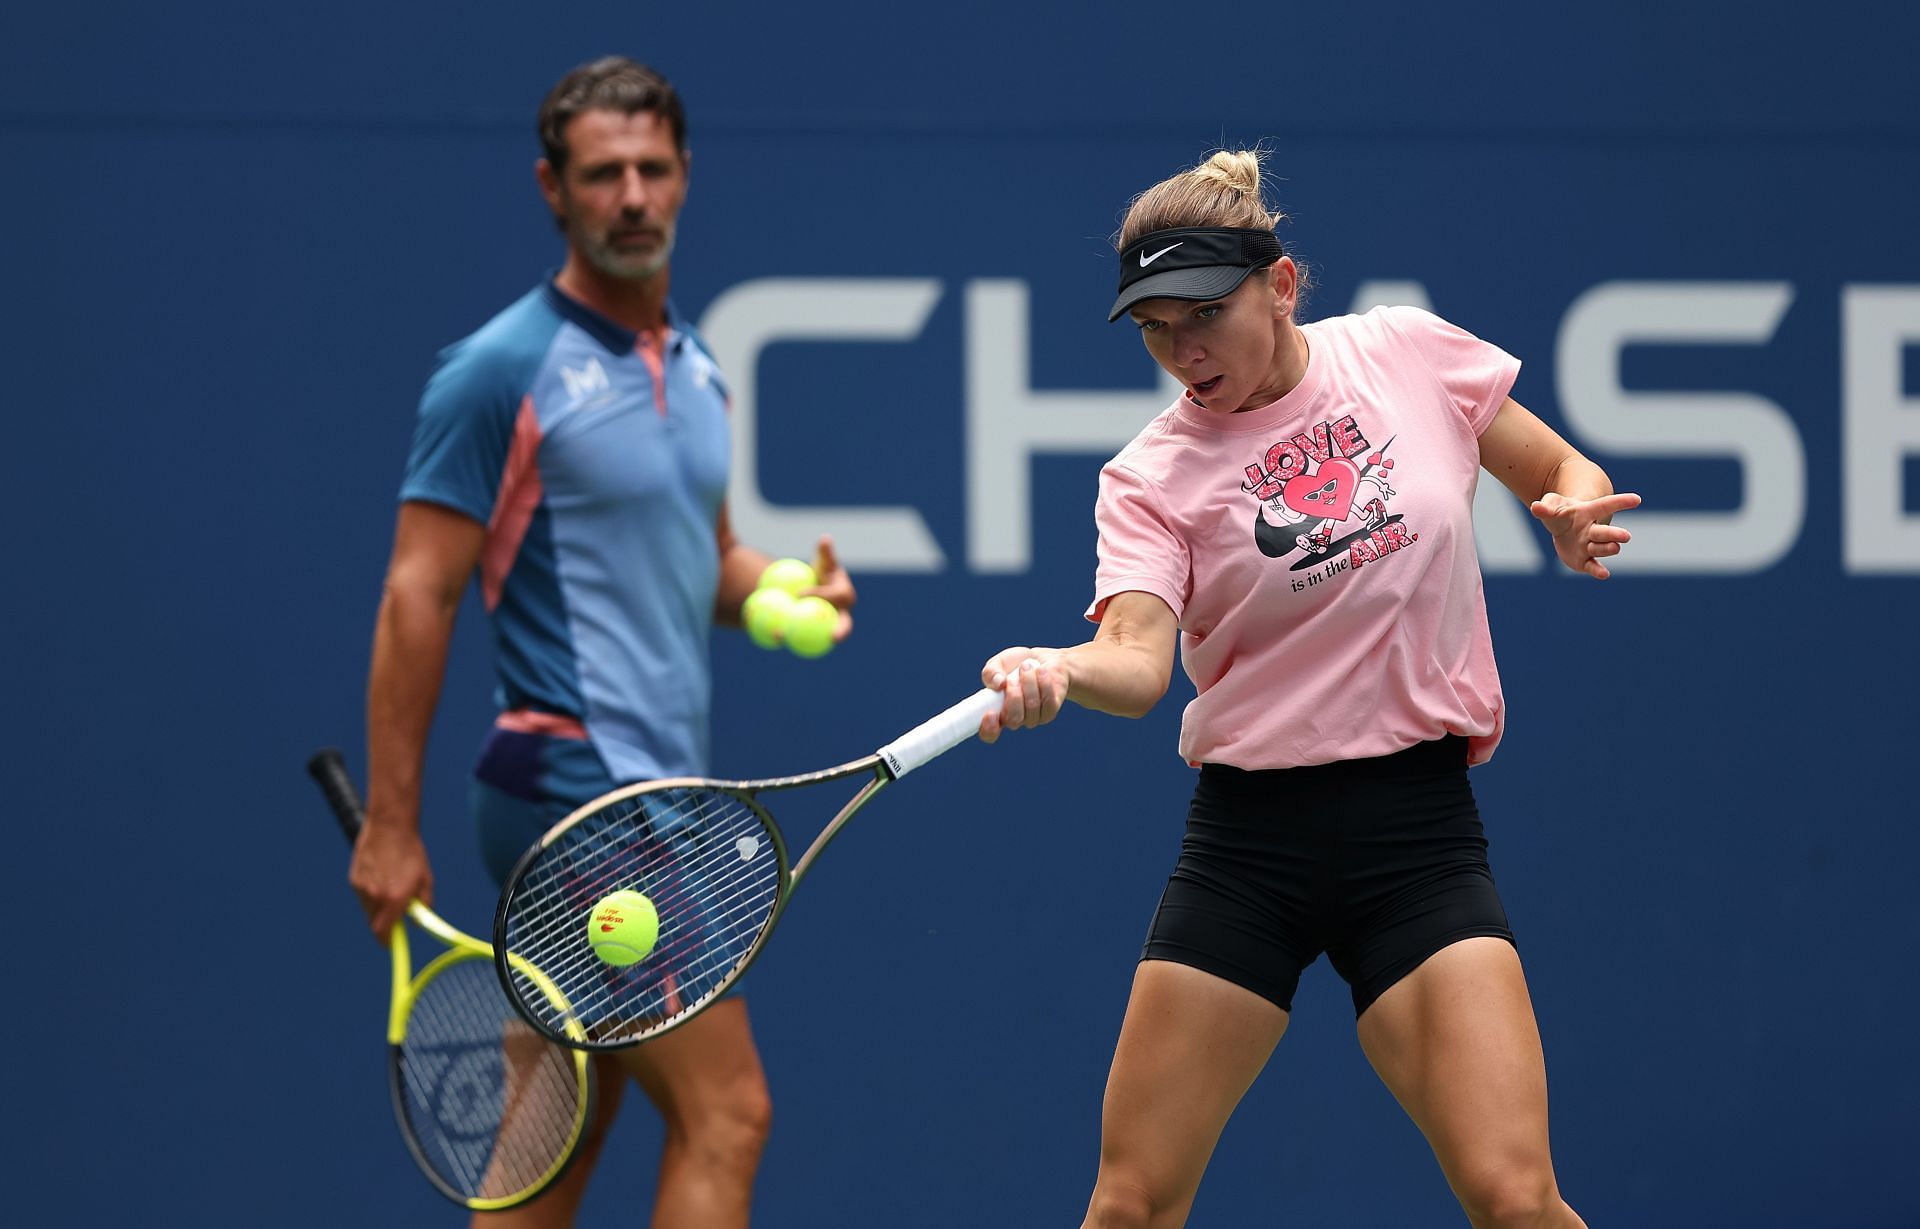 Patrick Mouratoglou and Simona Halep at the 2022 US Open